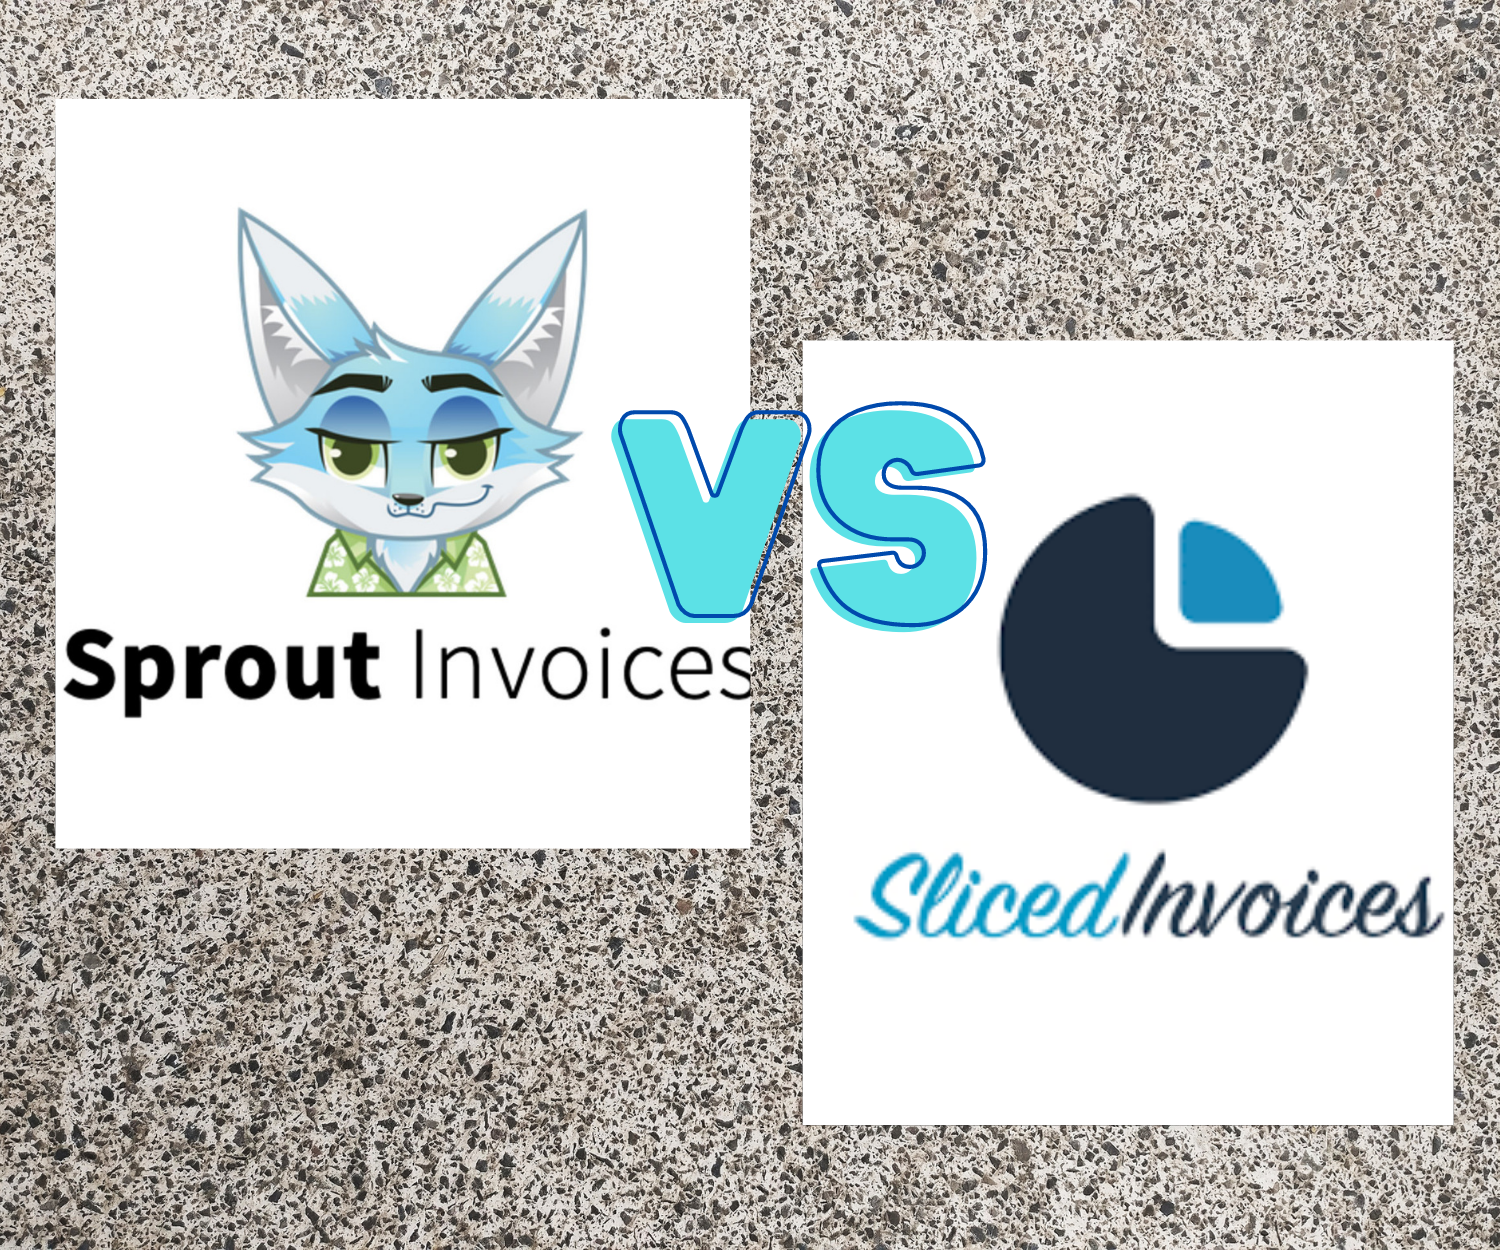 Sliced Invoices vs Sprout Invoices: Which option is better?